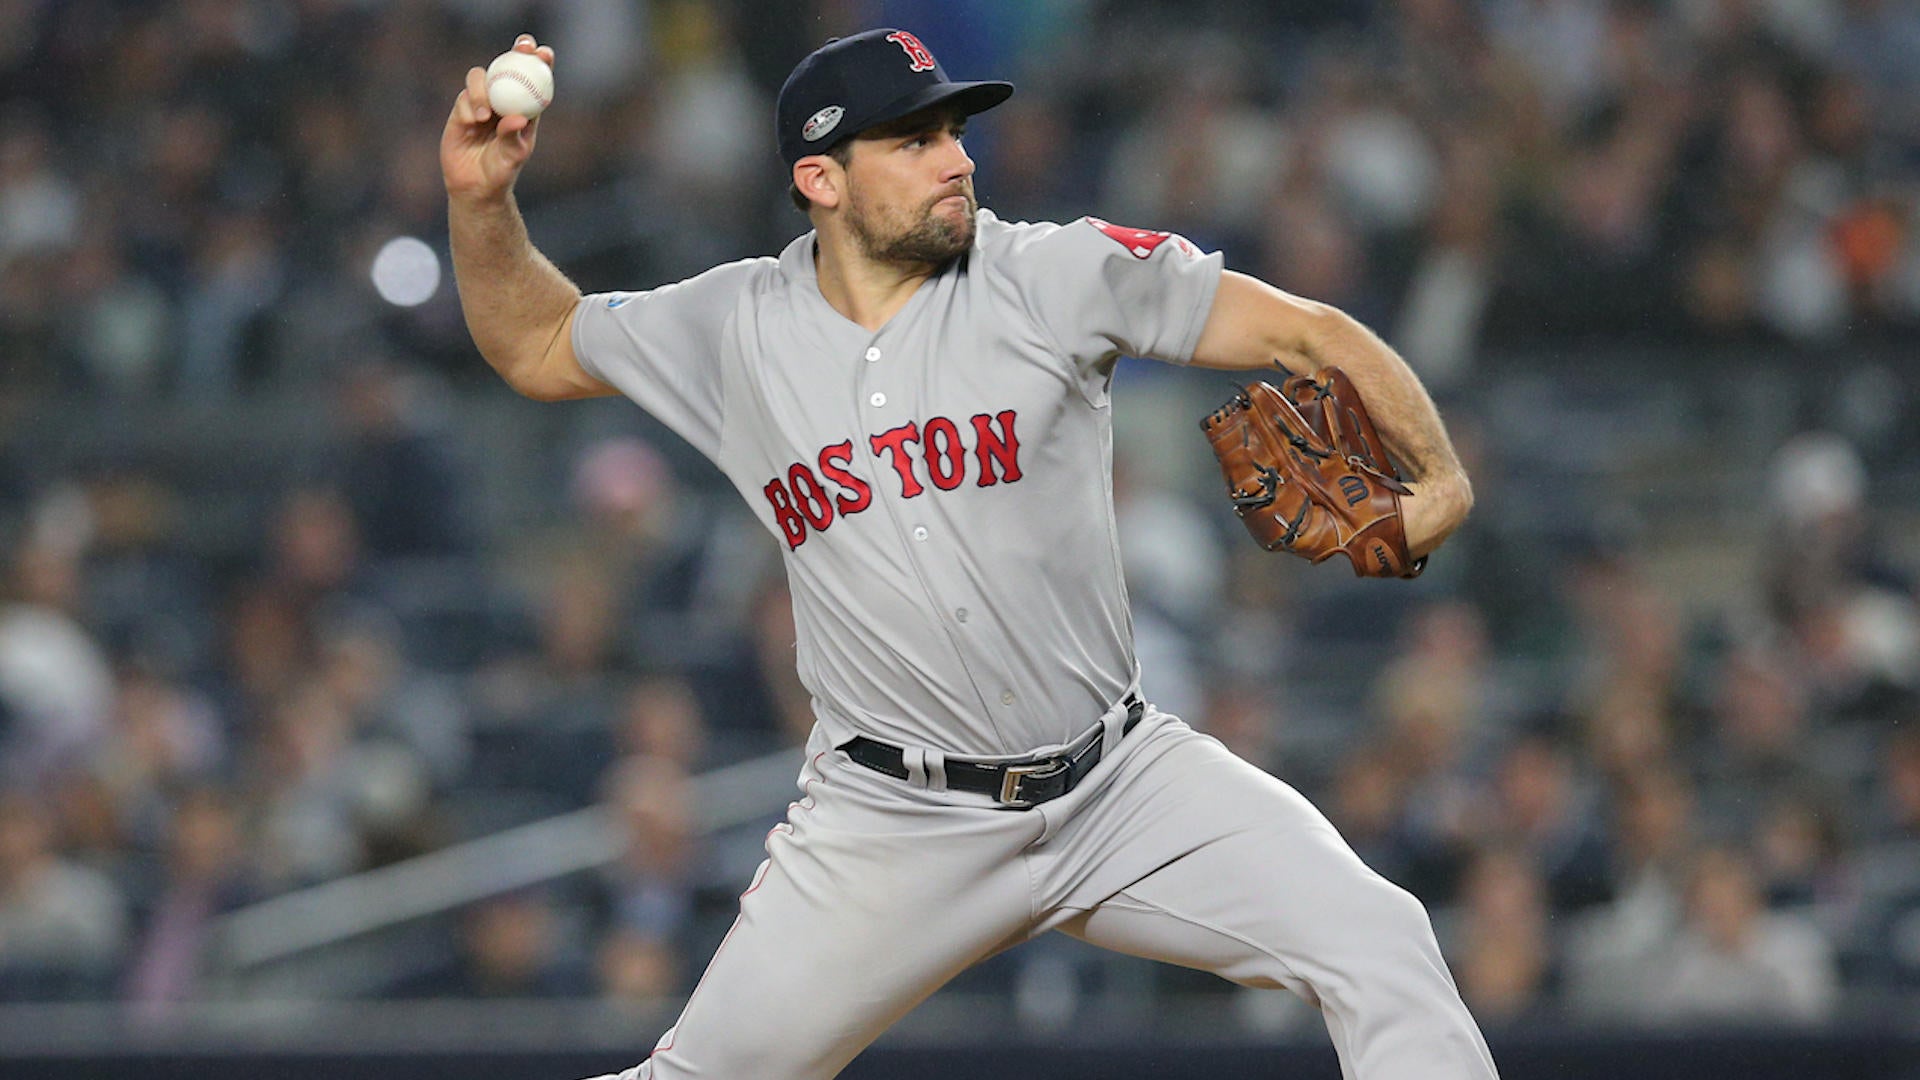 From Alvin to Boston, Nathan Eovaldi keeps working it